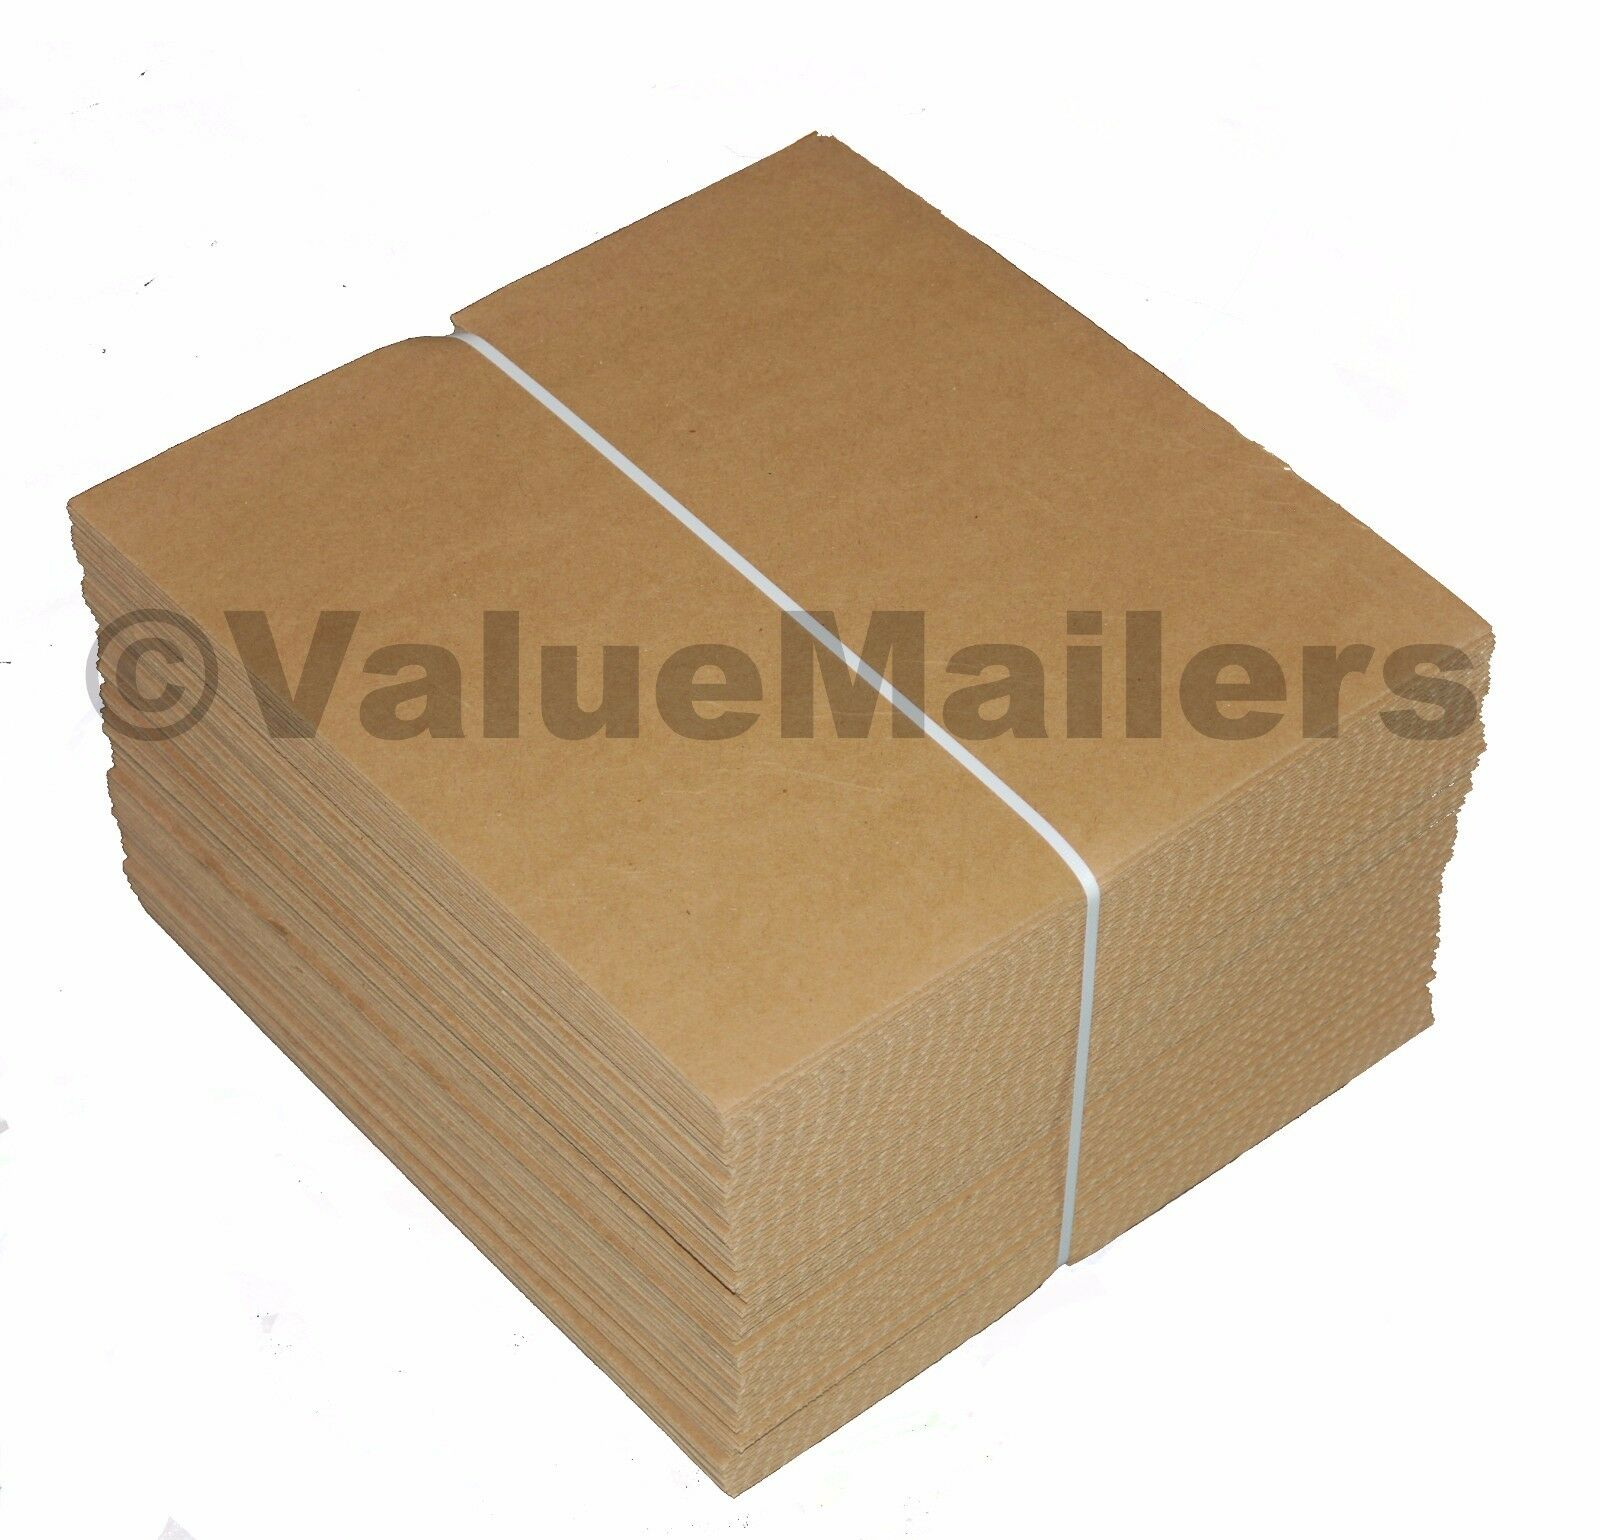 25 12" LP CRUCIFORM RECORD MAILERS BOX MULTI DEPTH HOLDS 1-15 LPS 24H 